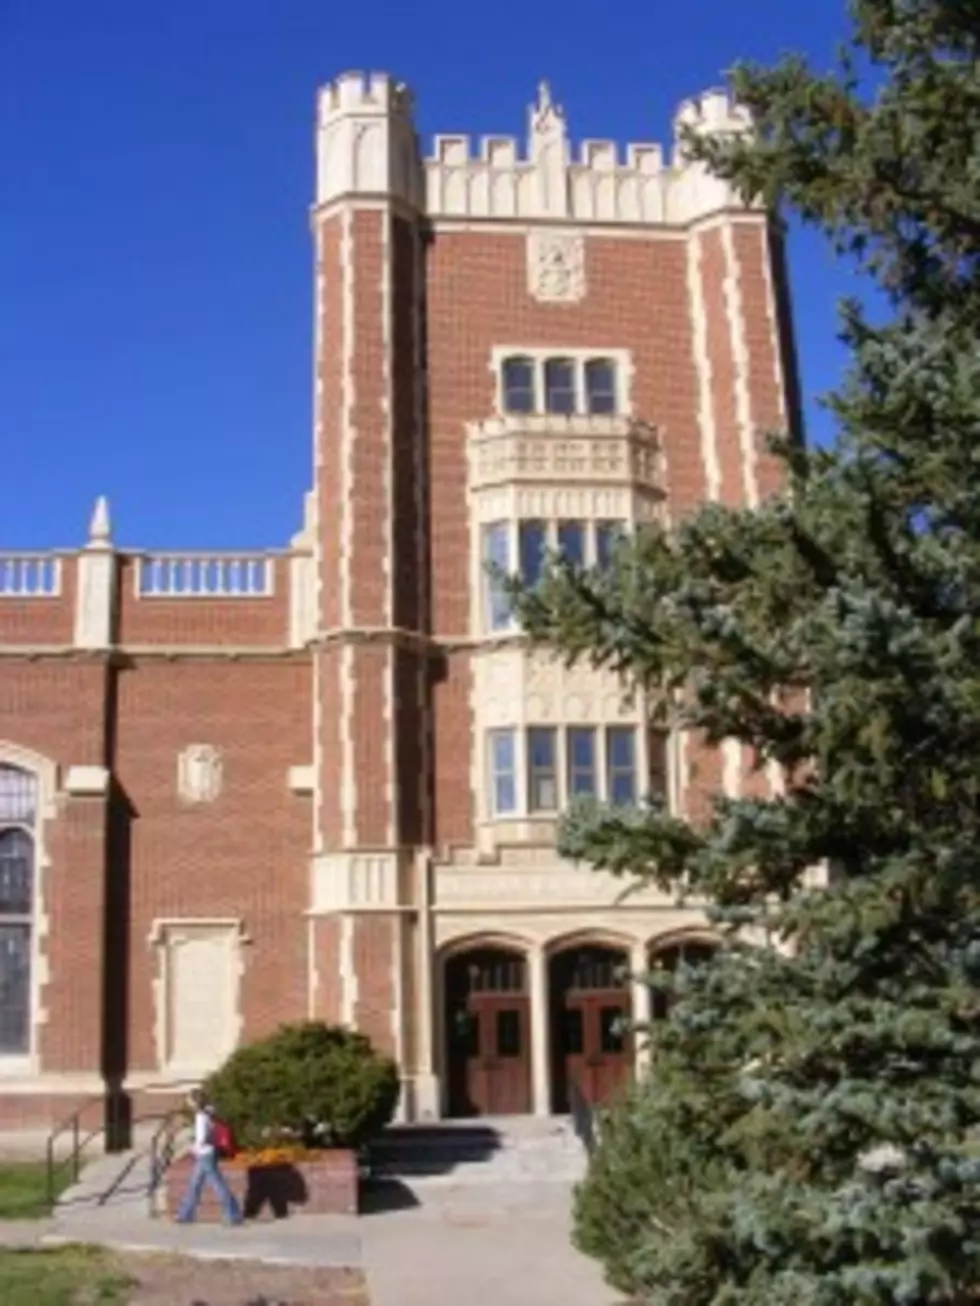 Investigation Continues Into Threat At Natrona Co. High School-Afternoon Update [AUDIO]